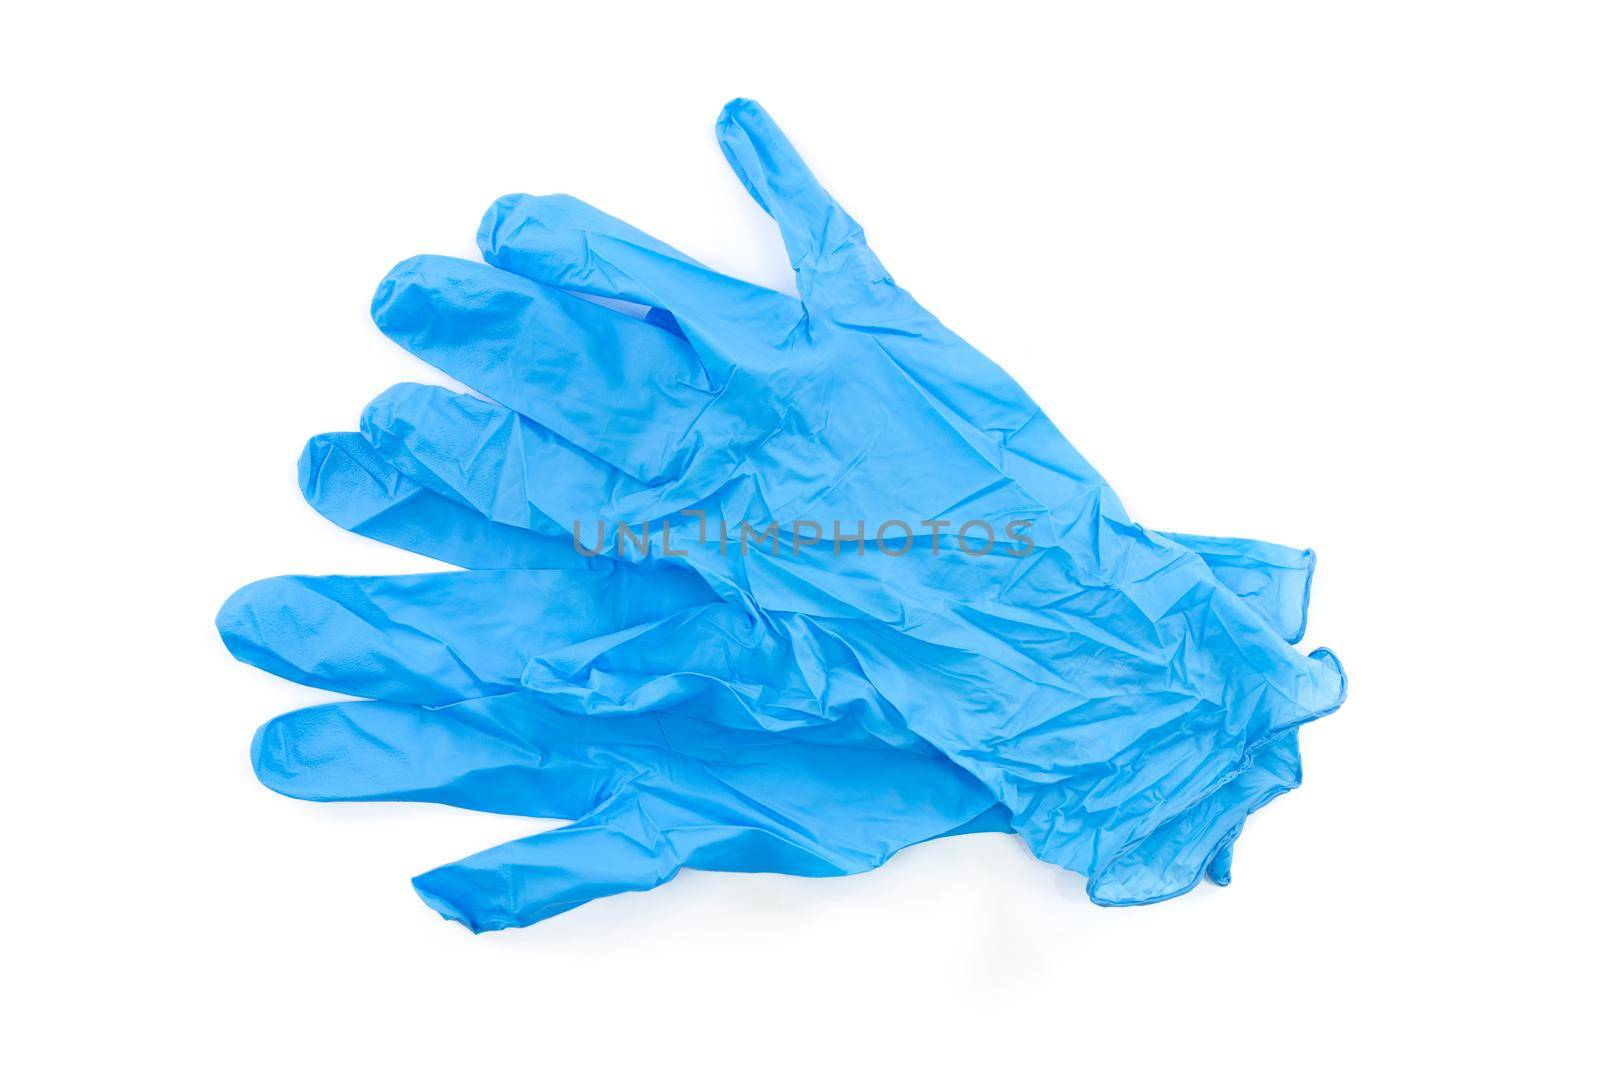 Blue latex medical and laboratory gloves isolated on white background